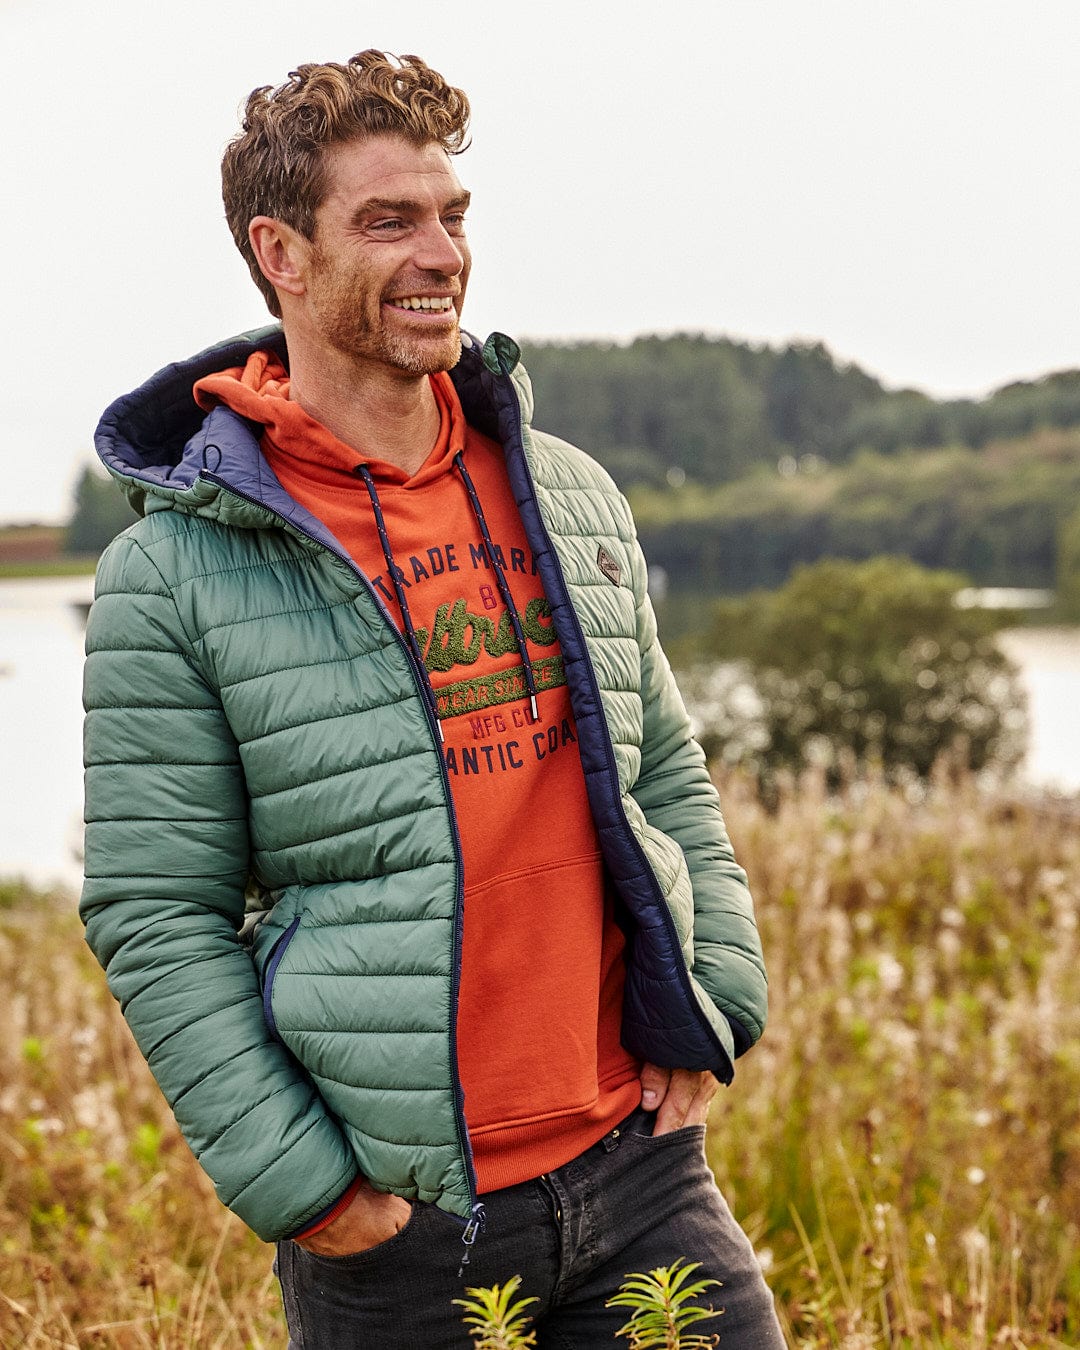 A man in a Saltrock Rusik 2 - Reversible Padded Jacket with zip pockets standing in a field.